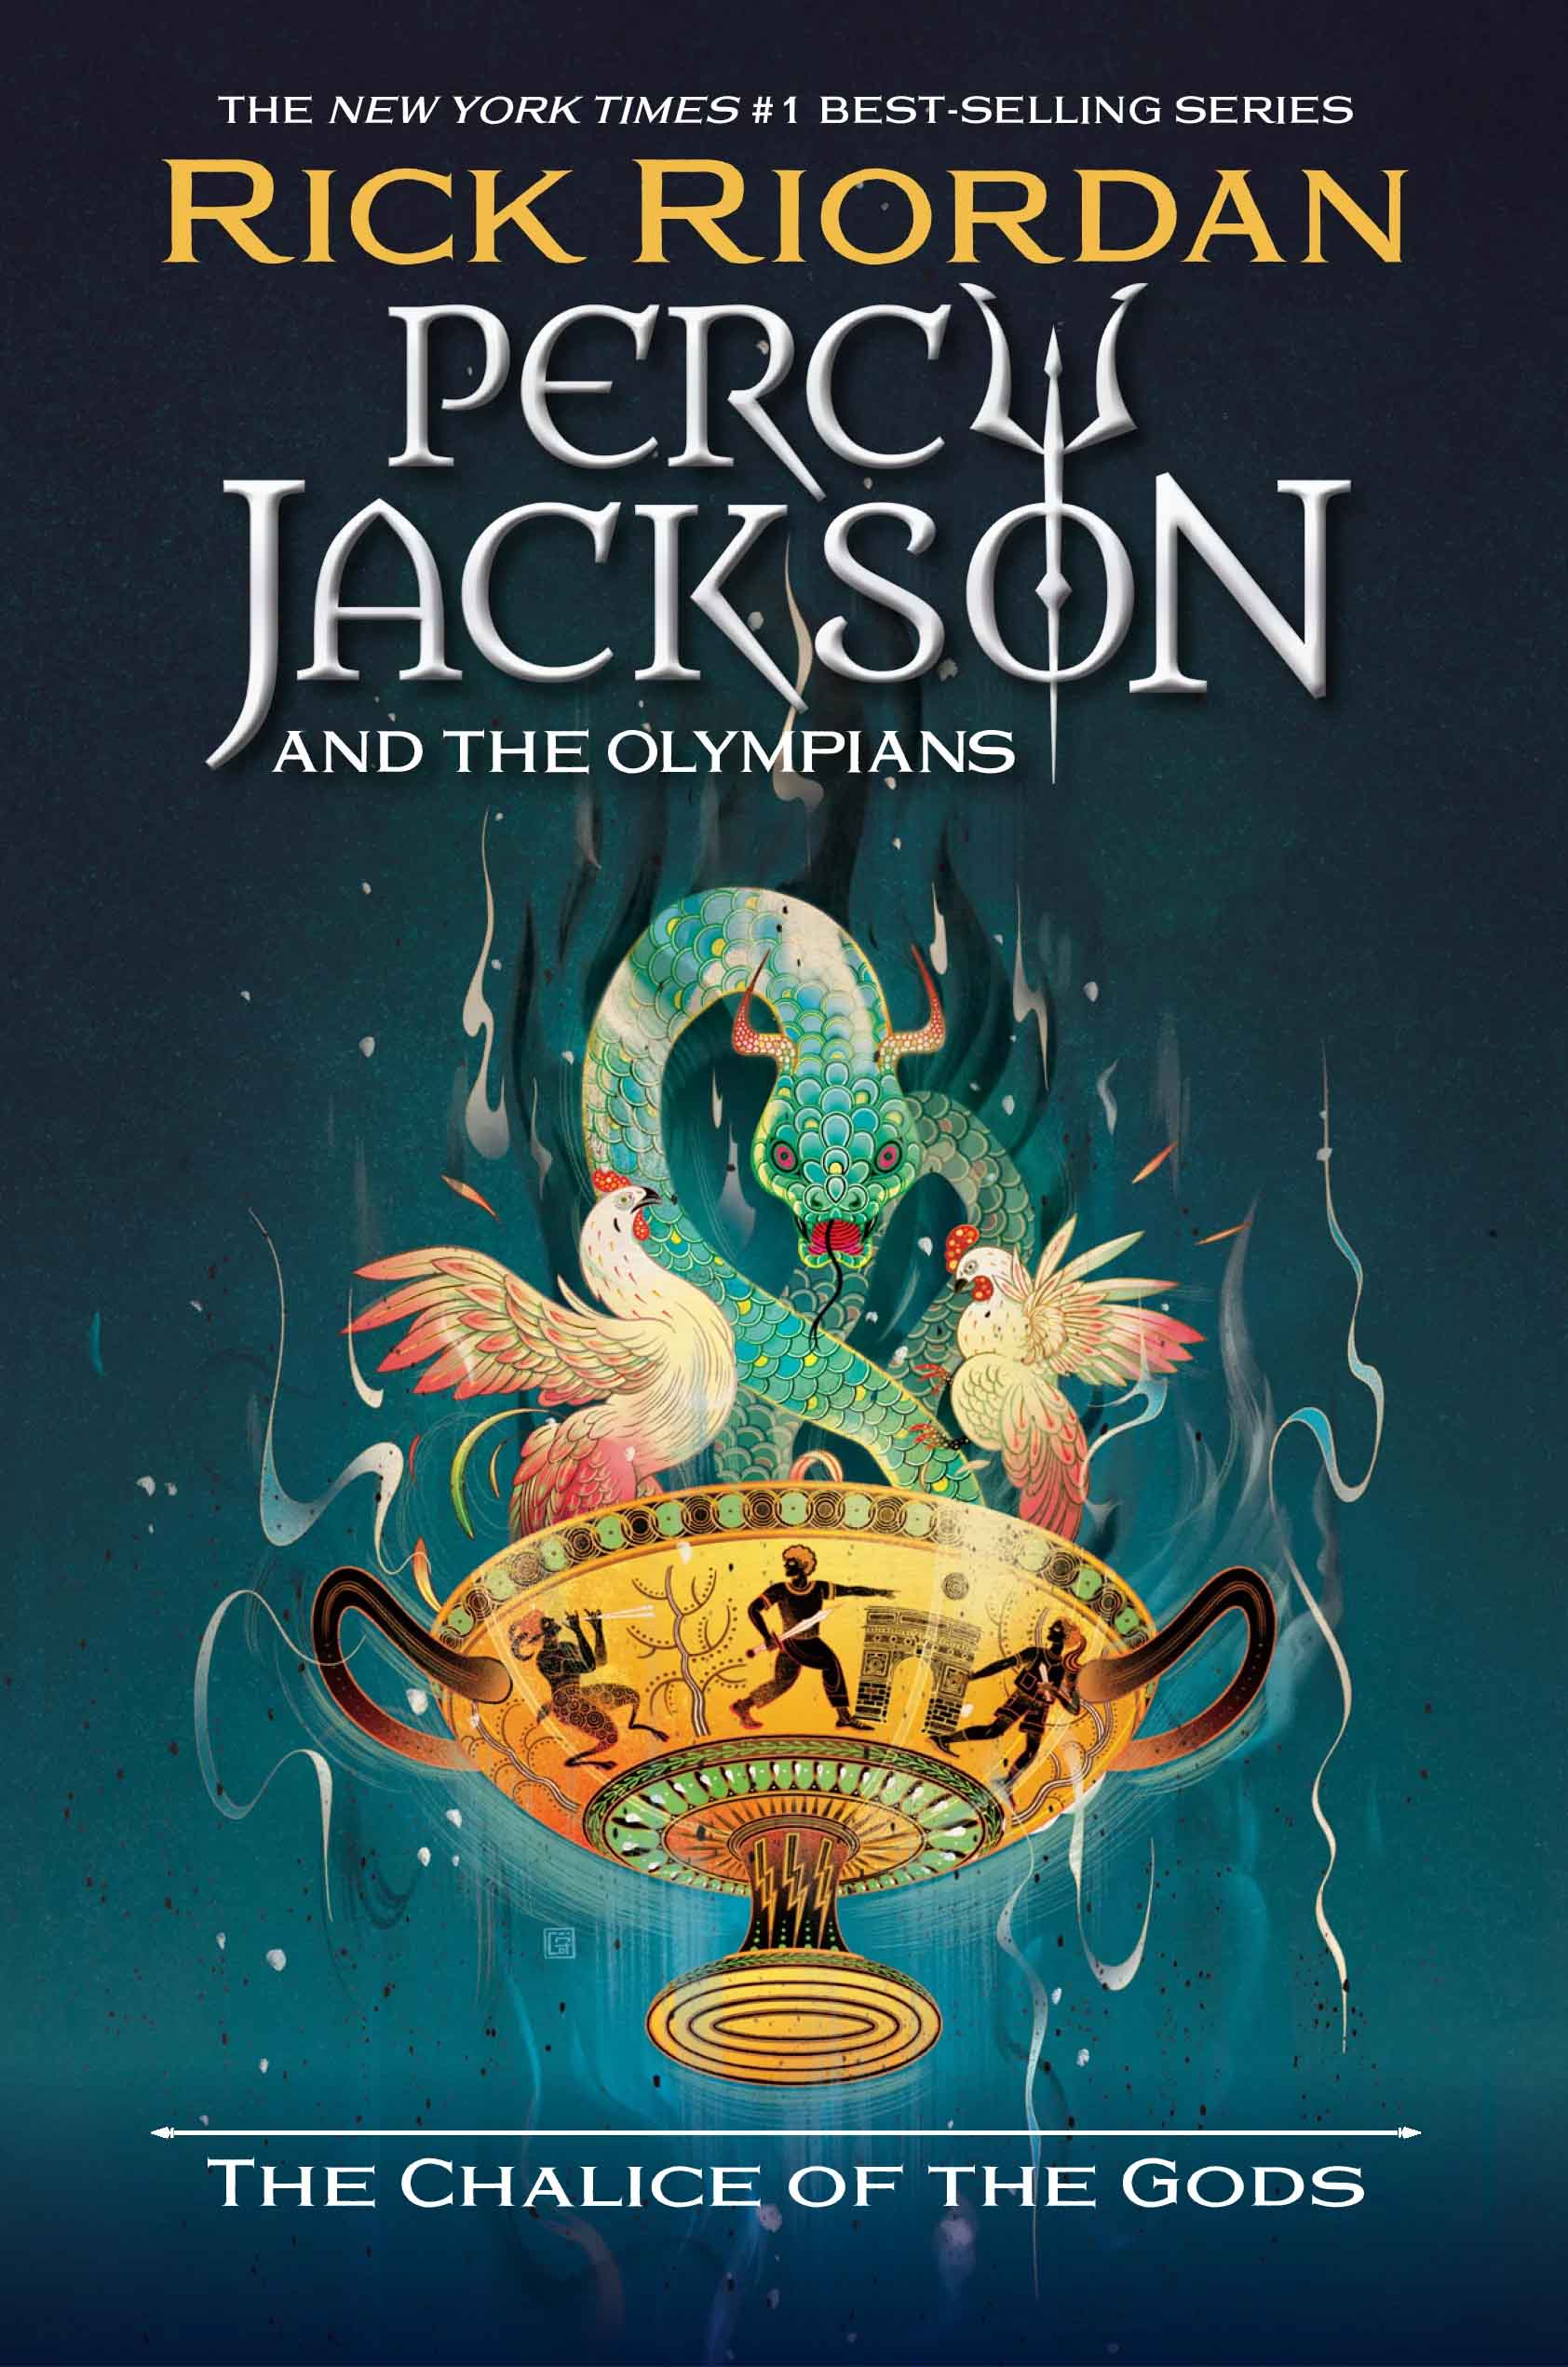 Percy Jackson: 10 You Need To Know About Camp Half-Blood